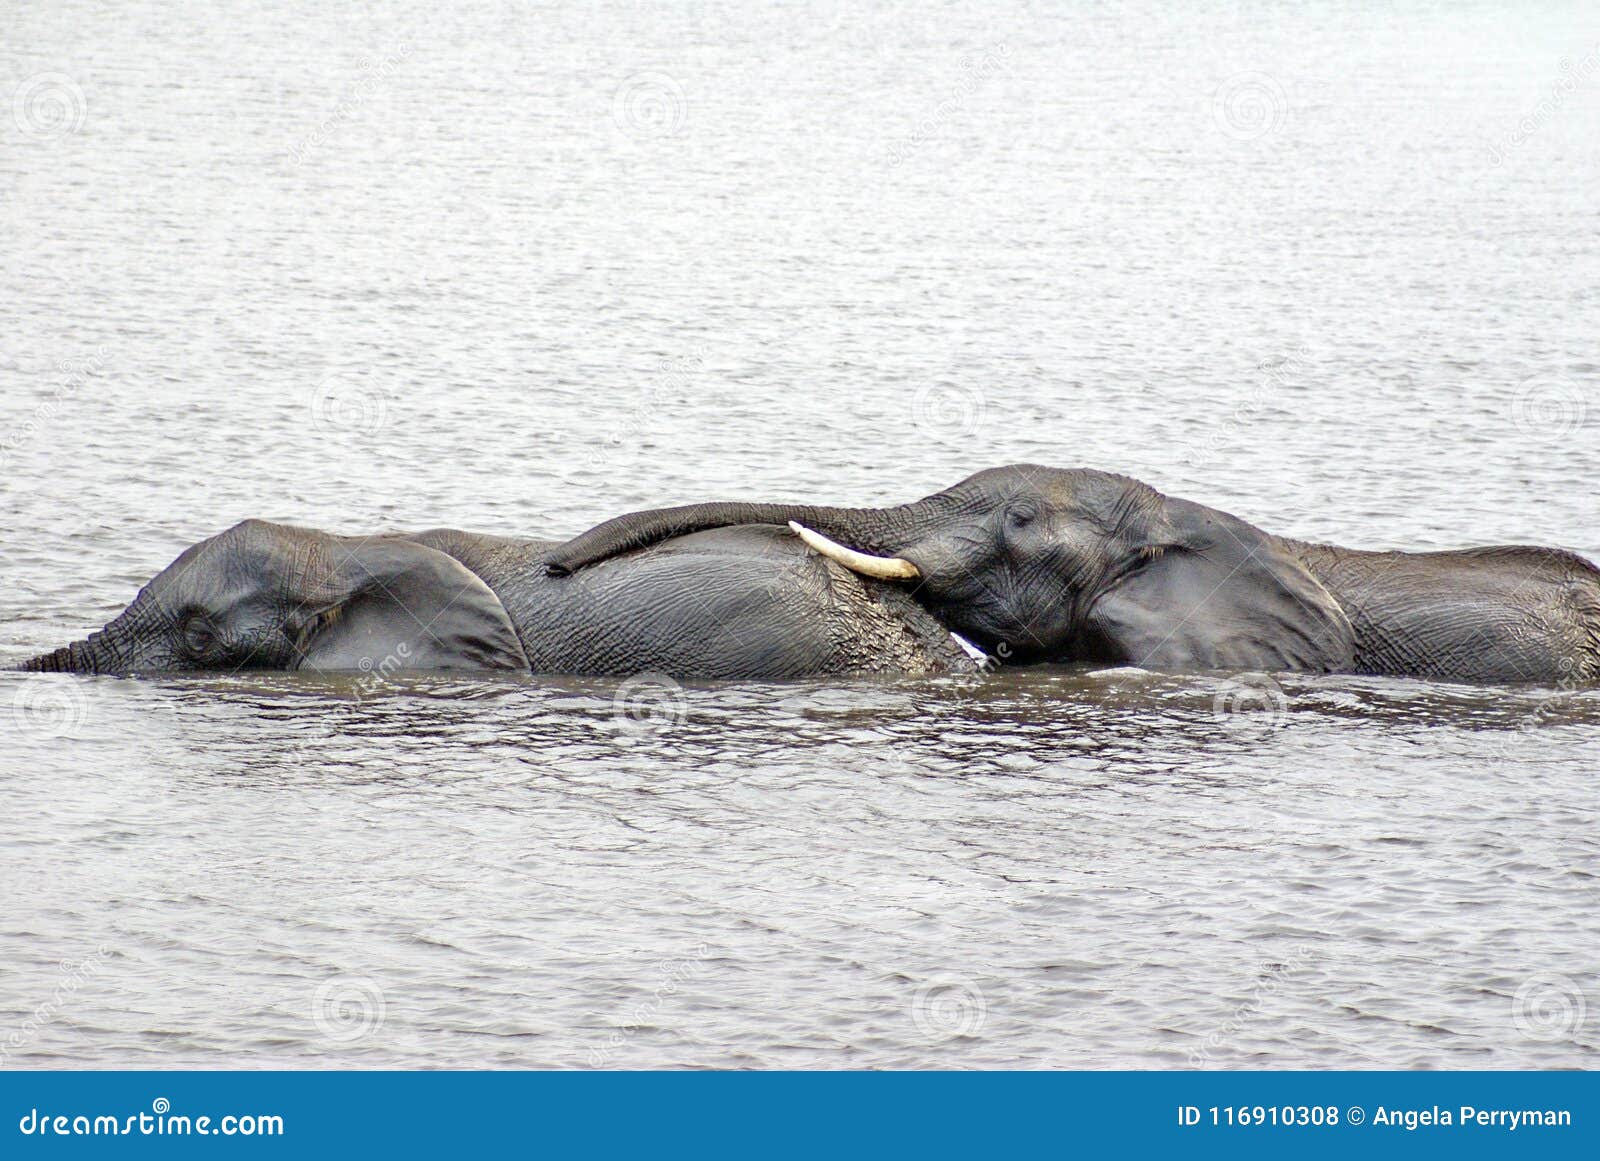 Elephants Having Sex In The River Stock Photo Image Of River